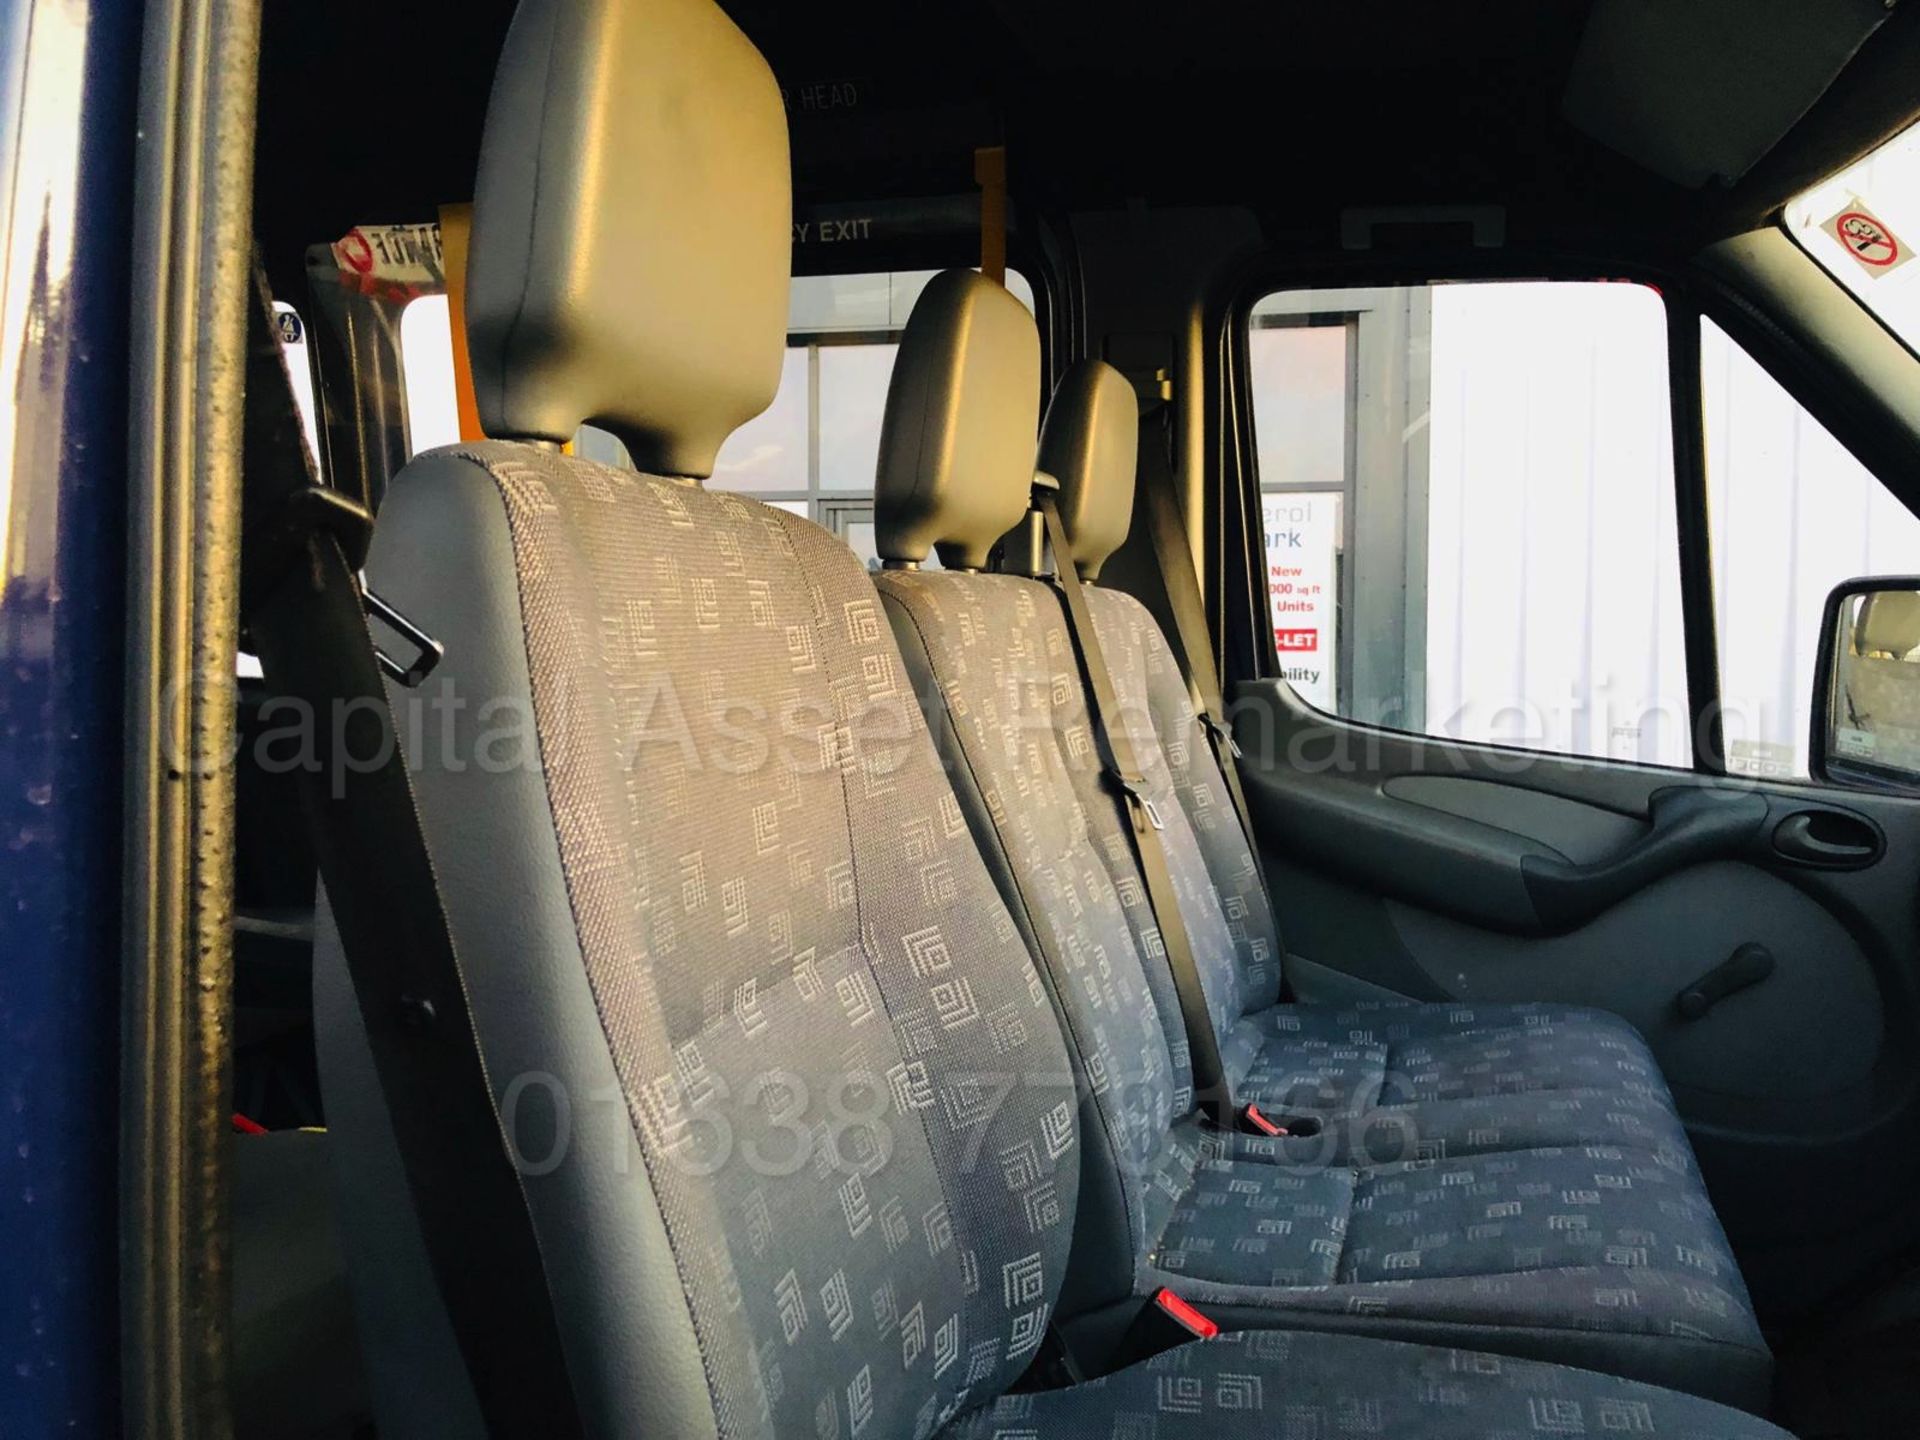 MERCEDES SPRINTER 411 CDI *LWB - 16 SEATER MINI-BUS* (2006) 'QUICK RELEASE SEATS - WHEEL CHAIR LIFT* - Image 22 of 24